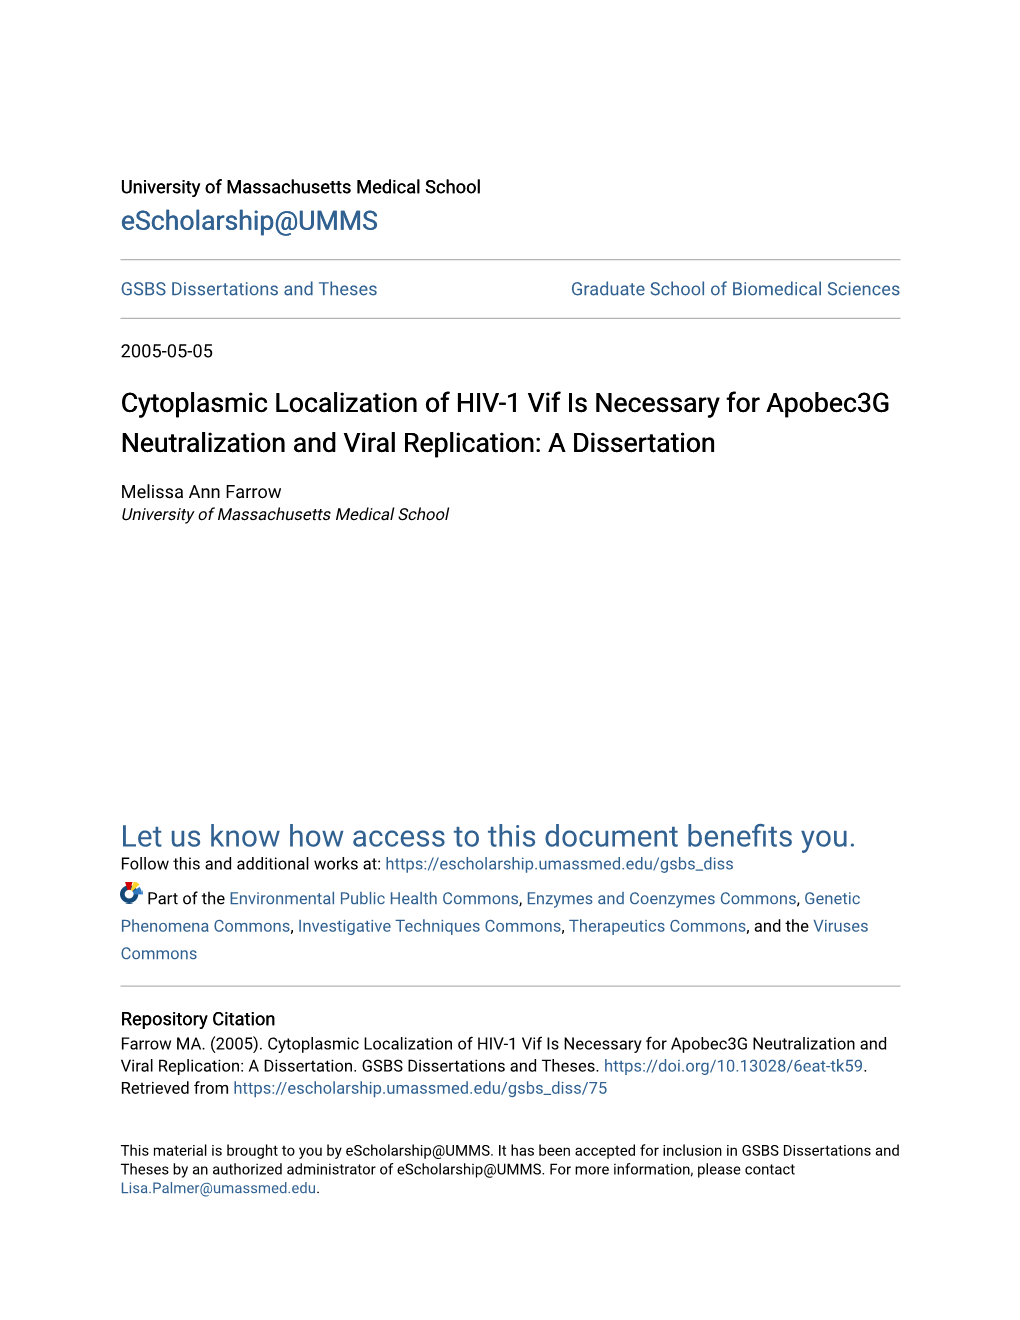 Cytoplasmic Localization of HIV-1 Vif Is Necessary for Apobec3g Neutralization and Viral Replication: a Dissertation